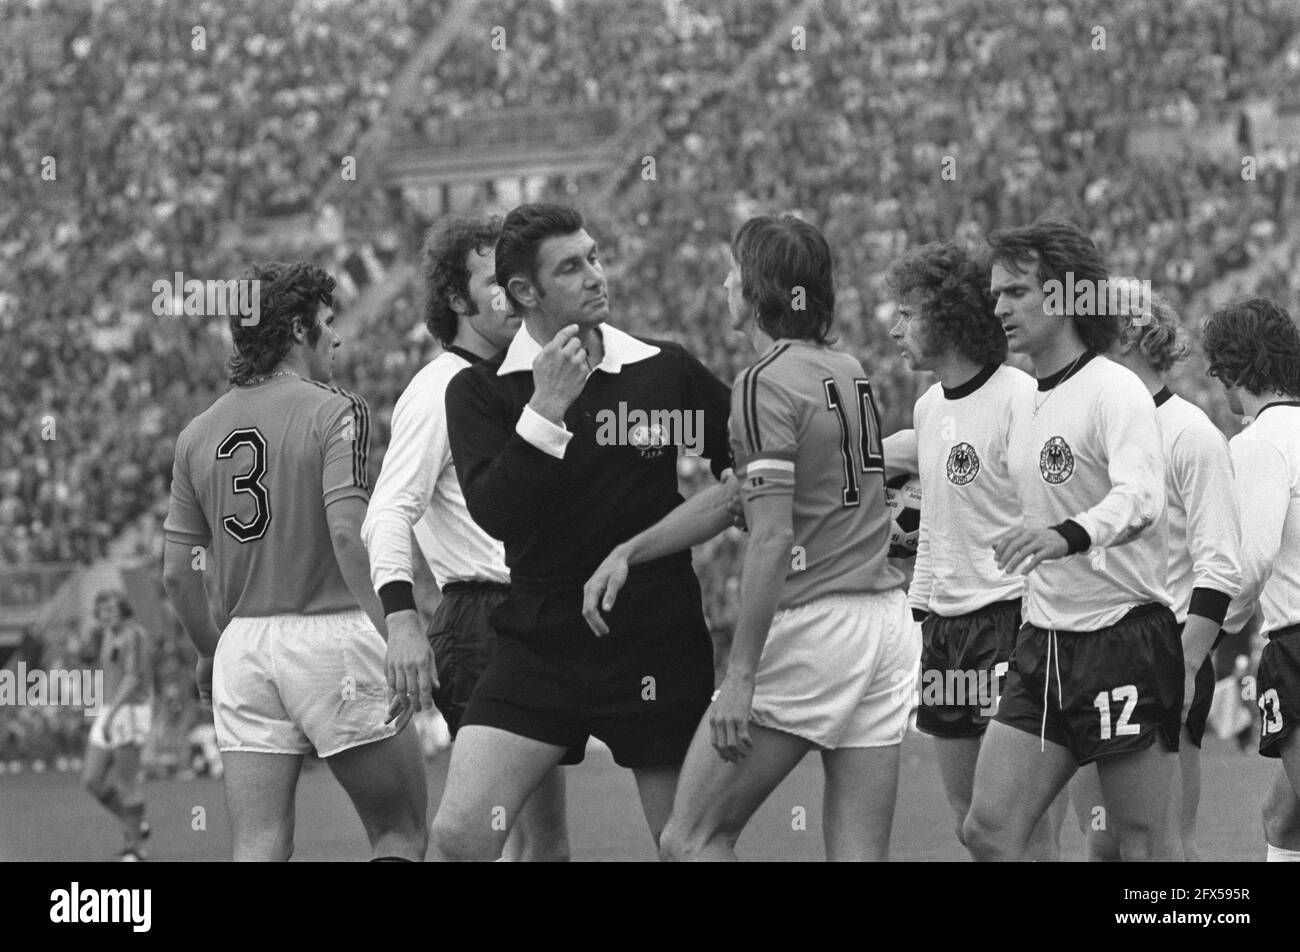 World Cup final 1974 in Munich, West Germany v Netherlands 2-1; referee Taylor in discussion with Cruijff, July 7, 1974, DISCUSSIONS, finals, sports, soccer, world championships, The Netherlands, 20th century press agency photo, news to remember, documentary, historic photography 1945-1990, visual stories, human history of the Twentieth Century, capturing moments in time Stock Photo